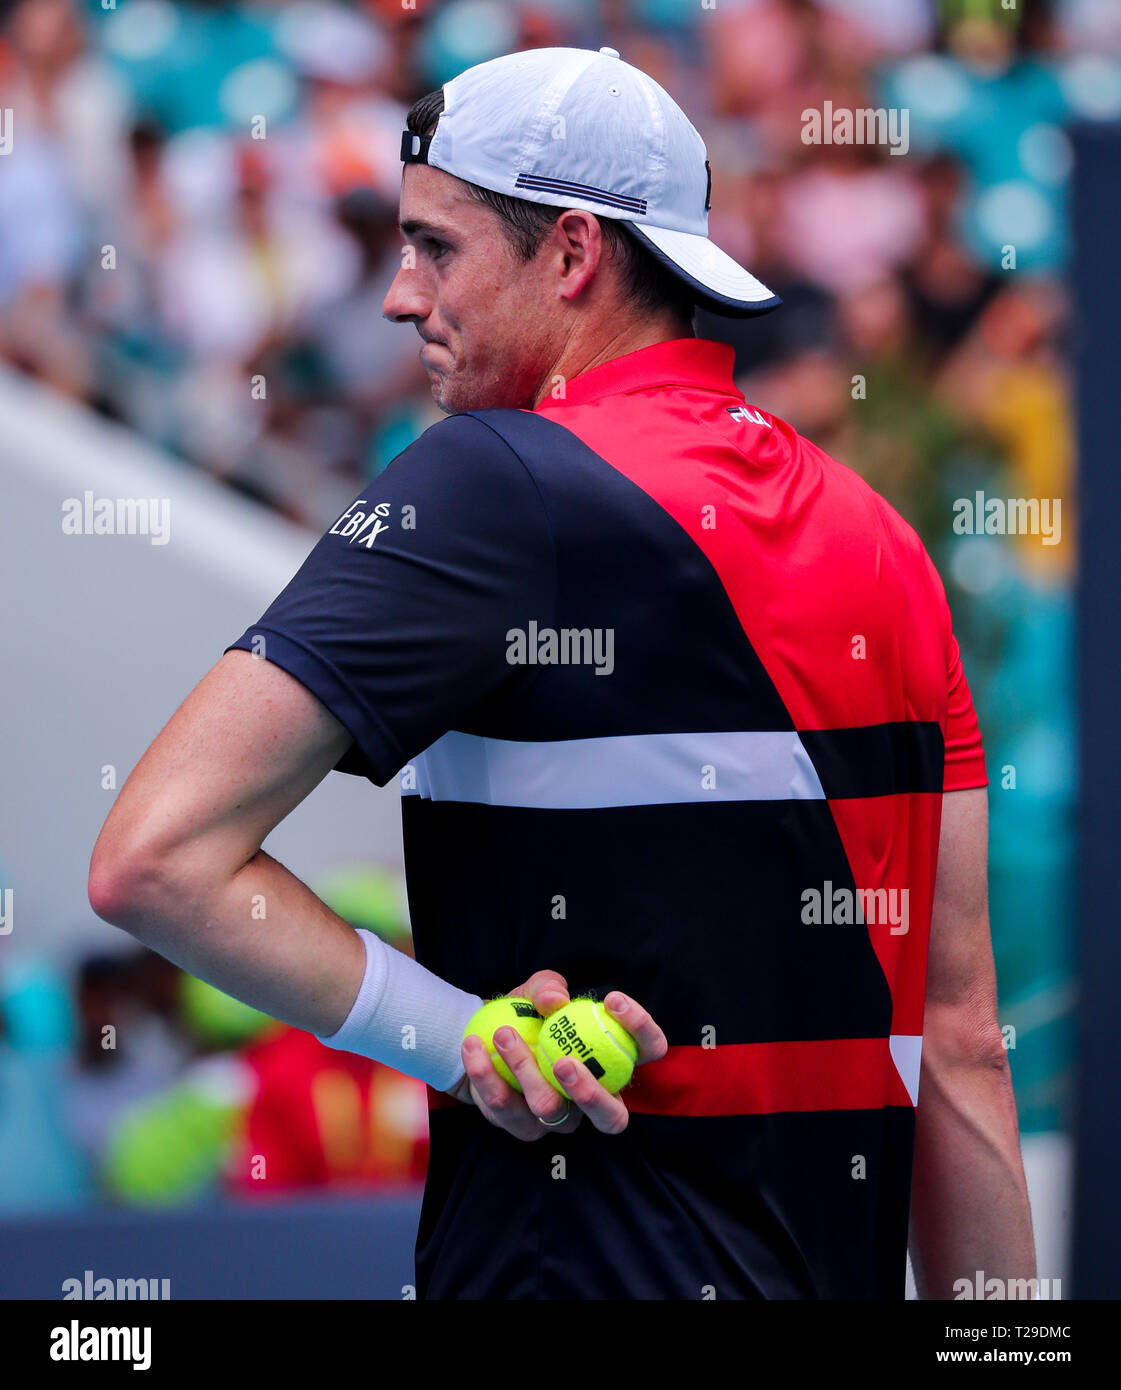 Miami Gardens, Florida, USA. 31st Mar, 2019. John Isner, of the United States, looks in pain during his match against Roger Federer, of Switzerland, in the Men's Singles final of the 2019 Miami Open Presented by Itau professional tennis tournament, played at the Hardrock Stadium in Miami Gardens, Florida, USA. Federer won 6-1, 6-4. Mario Houben/CSM/Alamy Live News Stock Photo